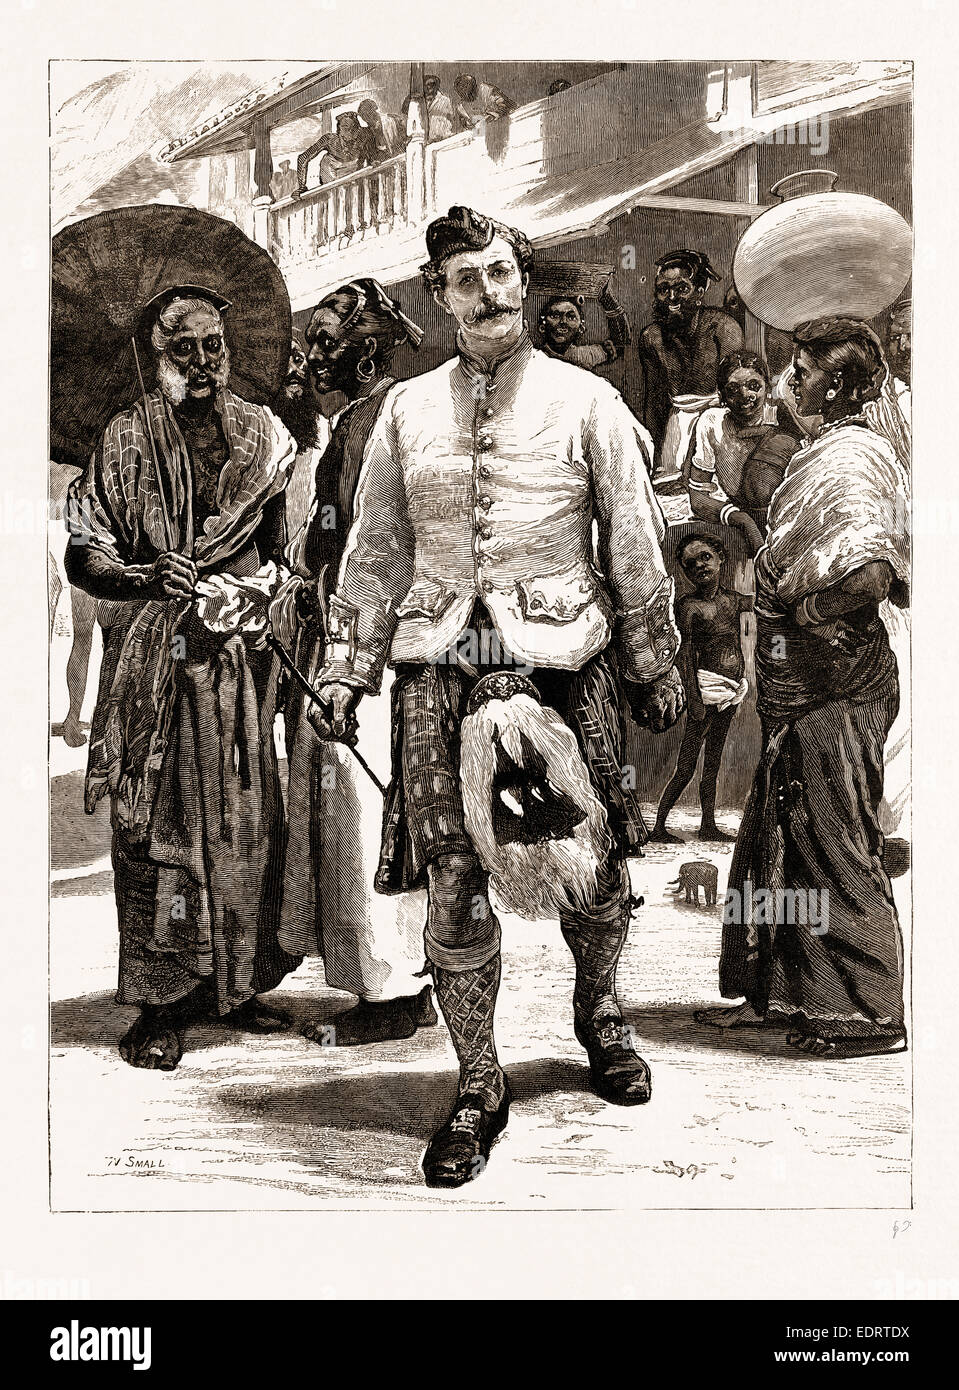 THE PRINCE OF WALES'S HIGHLAND PIPER ASTONISHING THE KANDYAN NATIVES, INDIA, 1876 Stock Photo